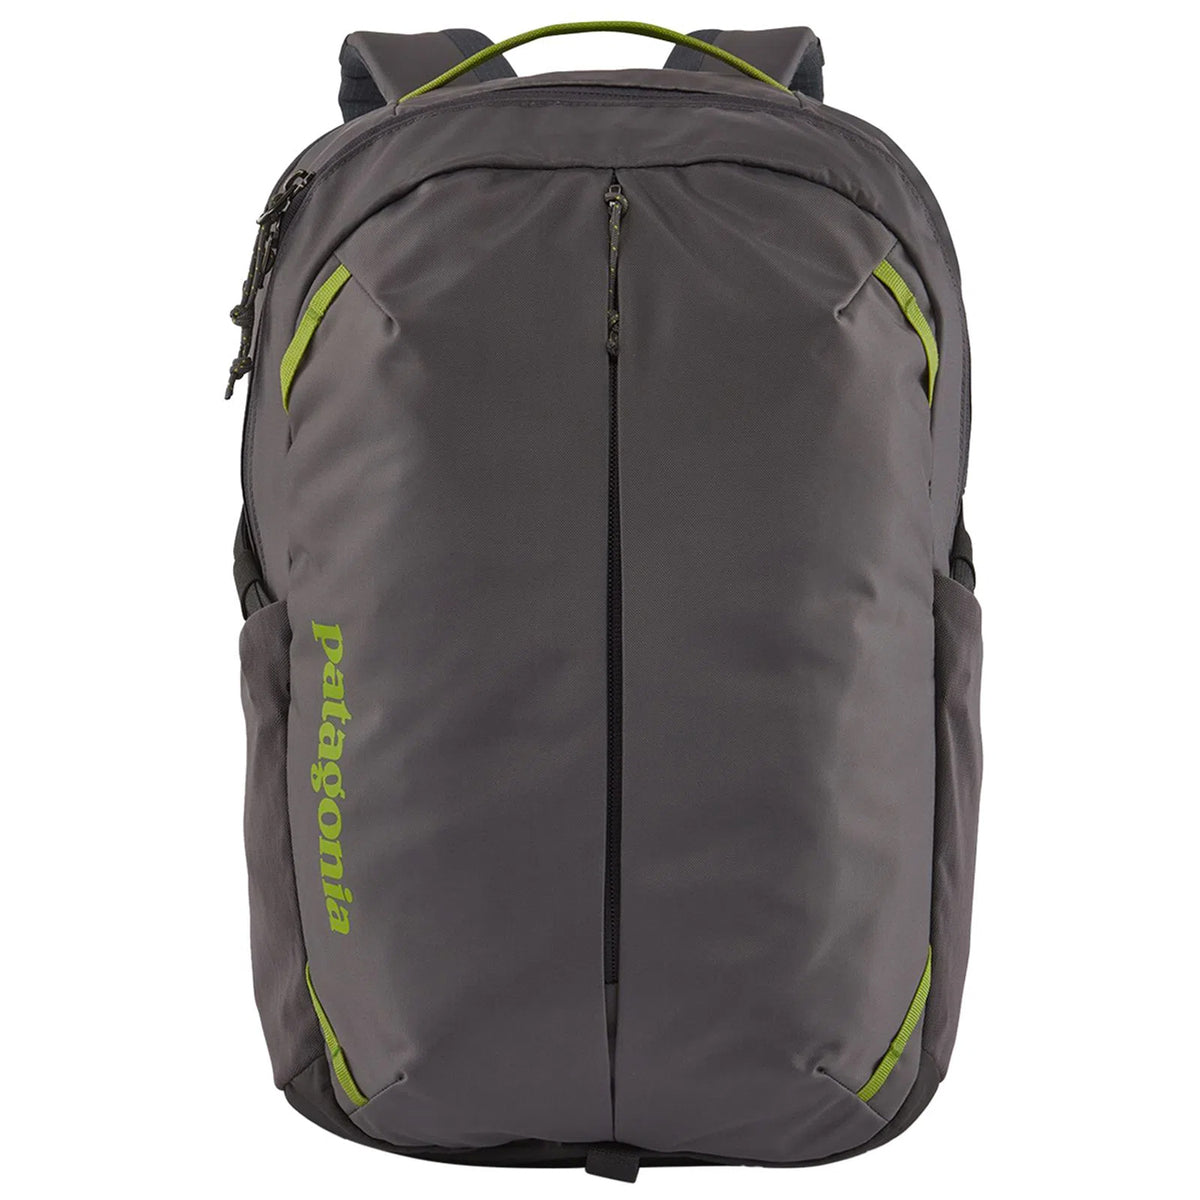 Foto kød indsats Patagonia Refugio Daypack 26L backpack - Grey – All4cycling